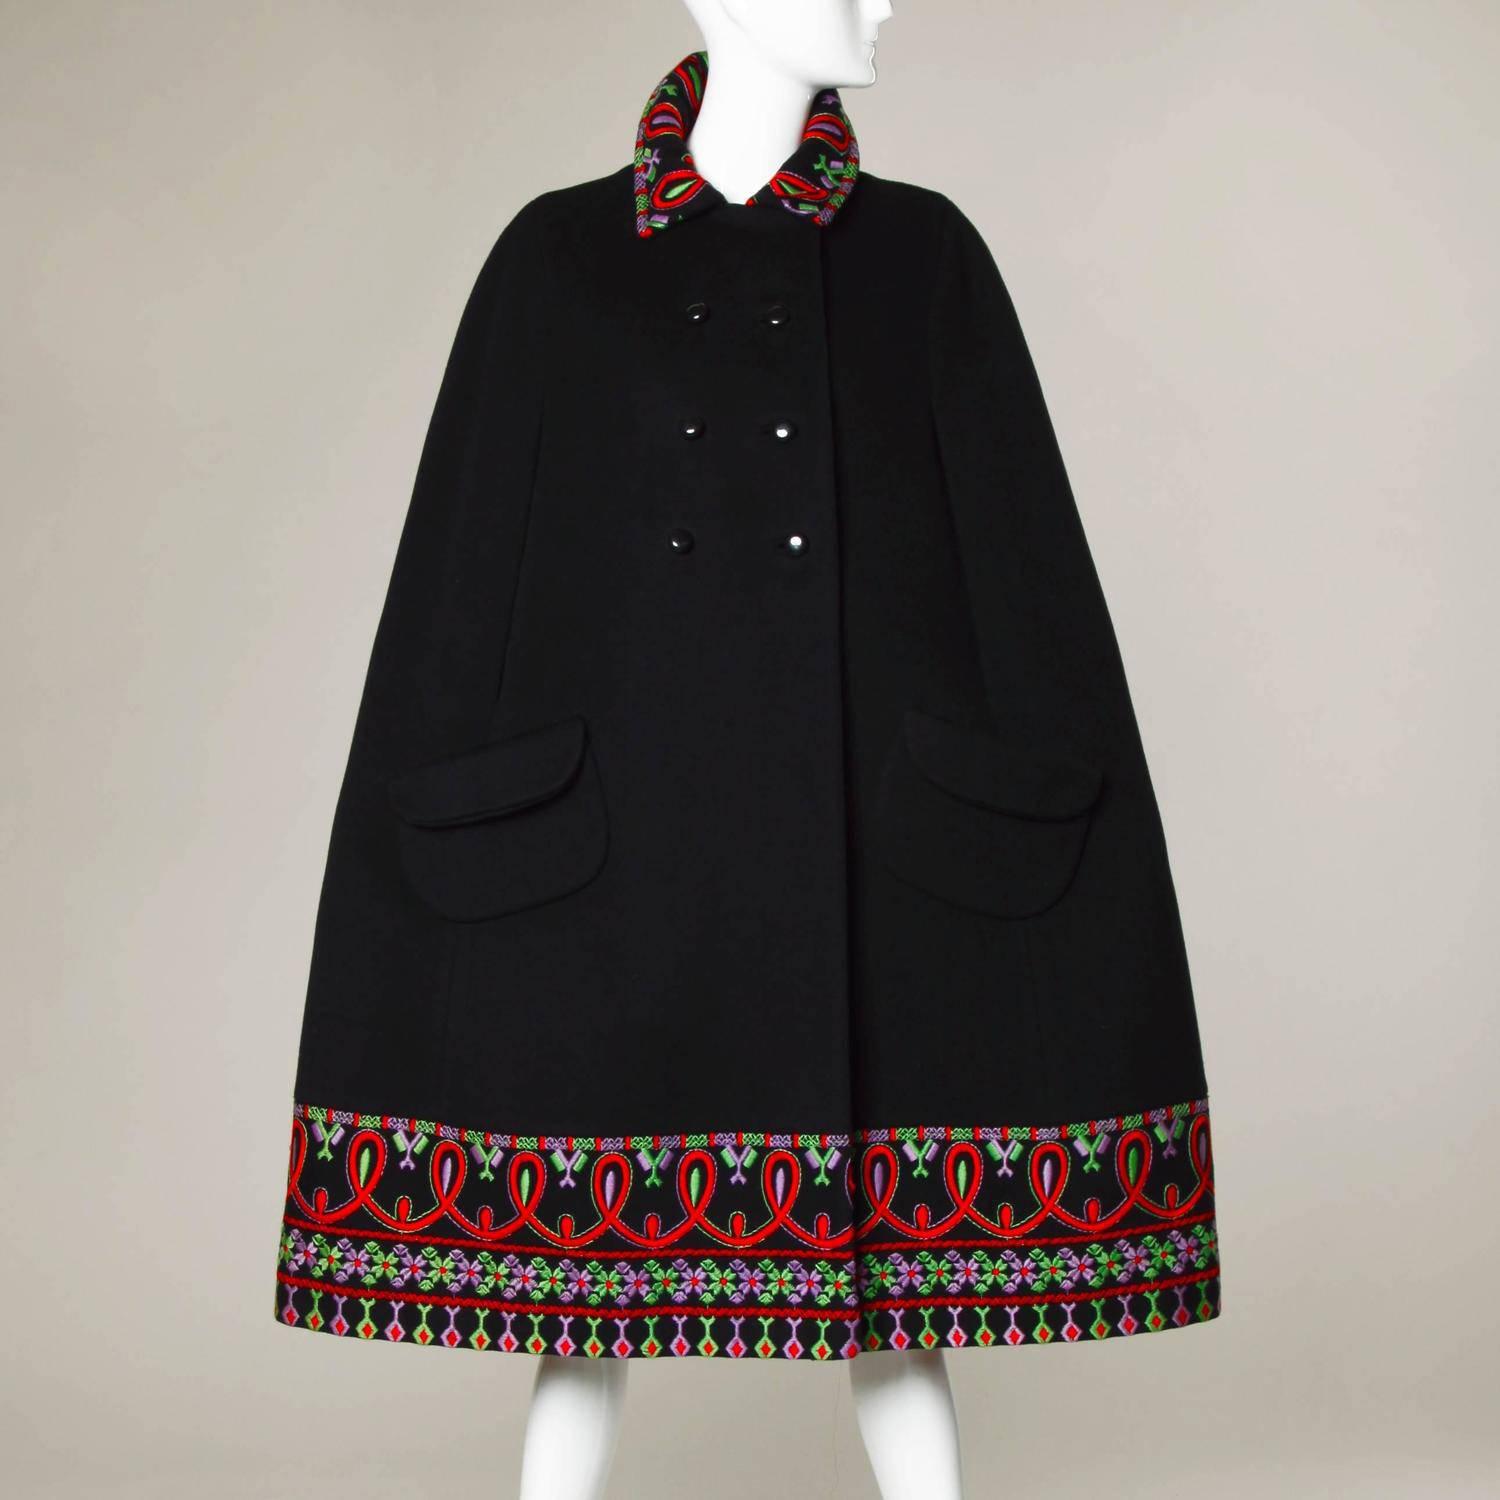 Vintage 1960s heavy black wool cape coat with folkloric-style hand embroidery, arm slits and double breasted buttons by Stegari. Fully lined in red satin with button and snap closure. Front pockets. 100% Pure virgin wool. Fits most sizes small,